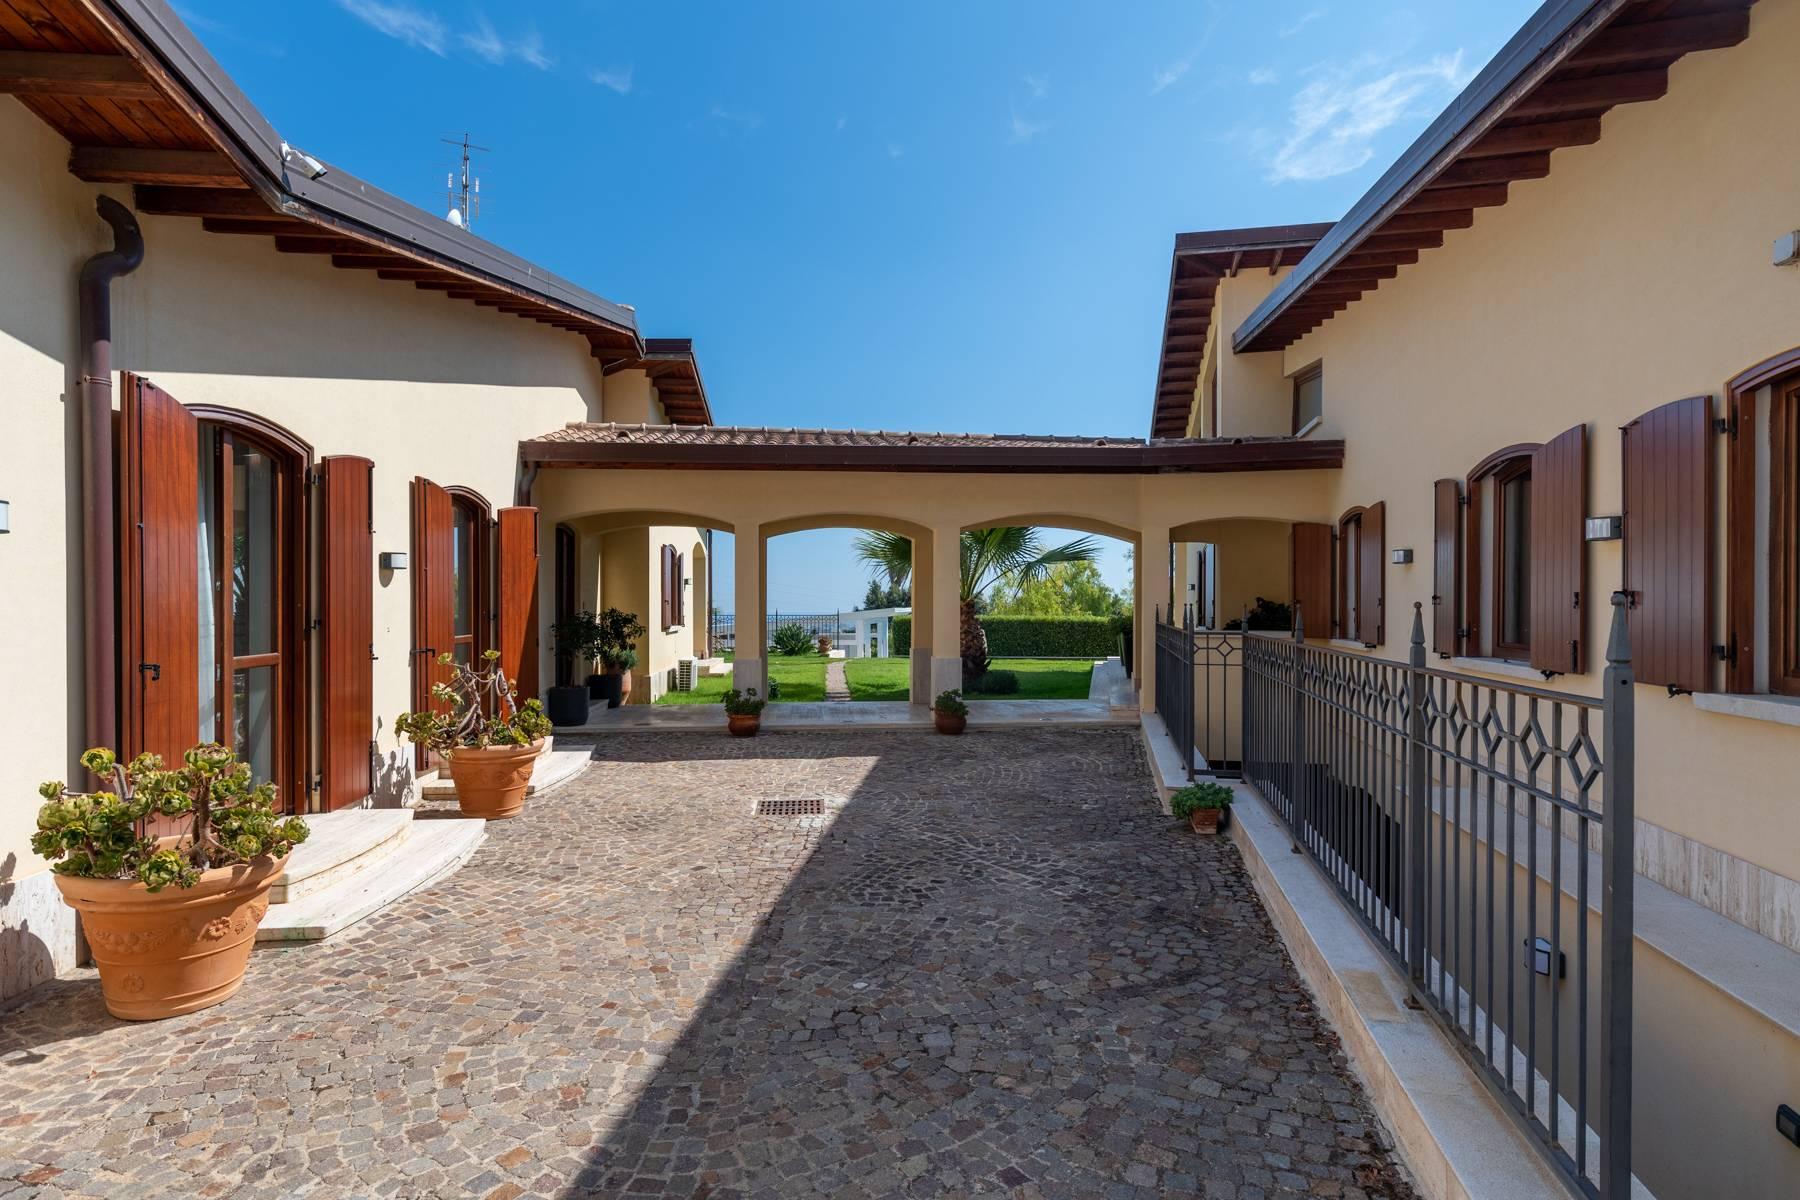 BEAUTIFUL ESTATE IN MONREALE WITH BREATHTAKING VIEWS OF THE GULF OF PALERMO - 17